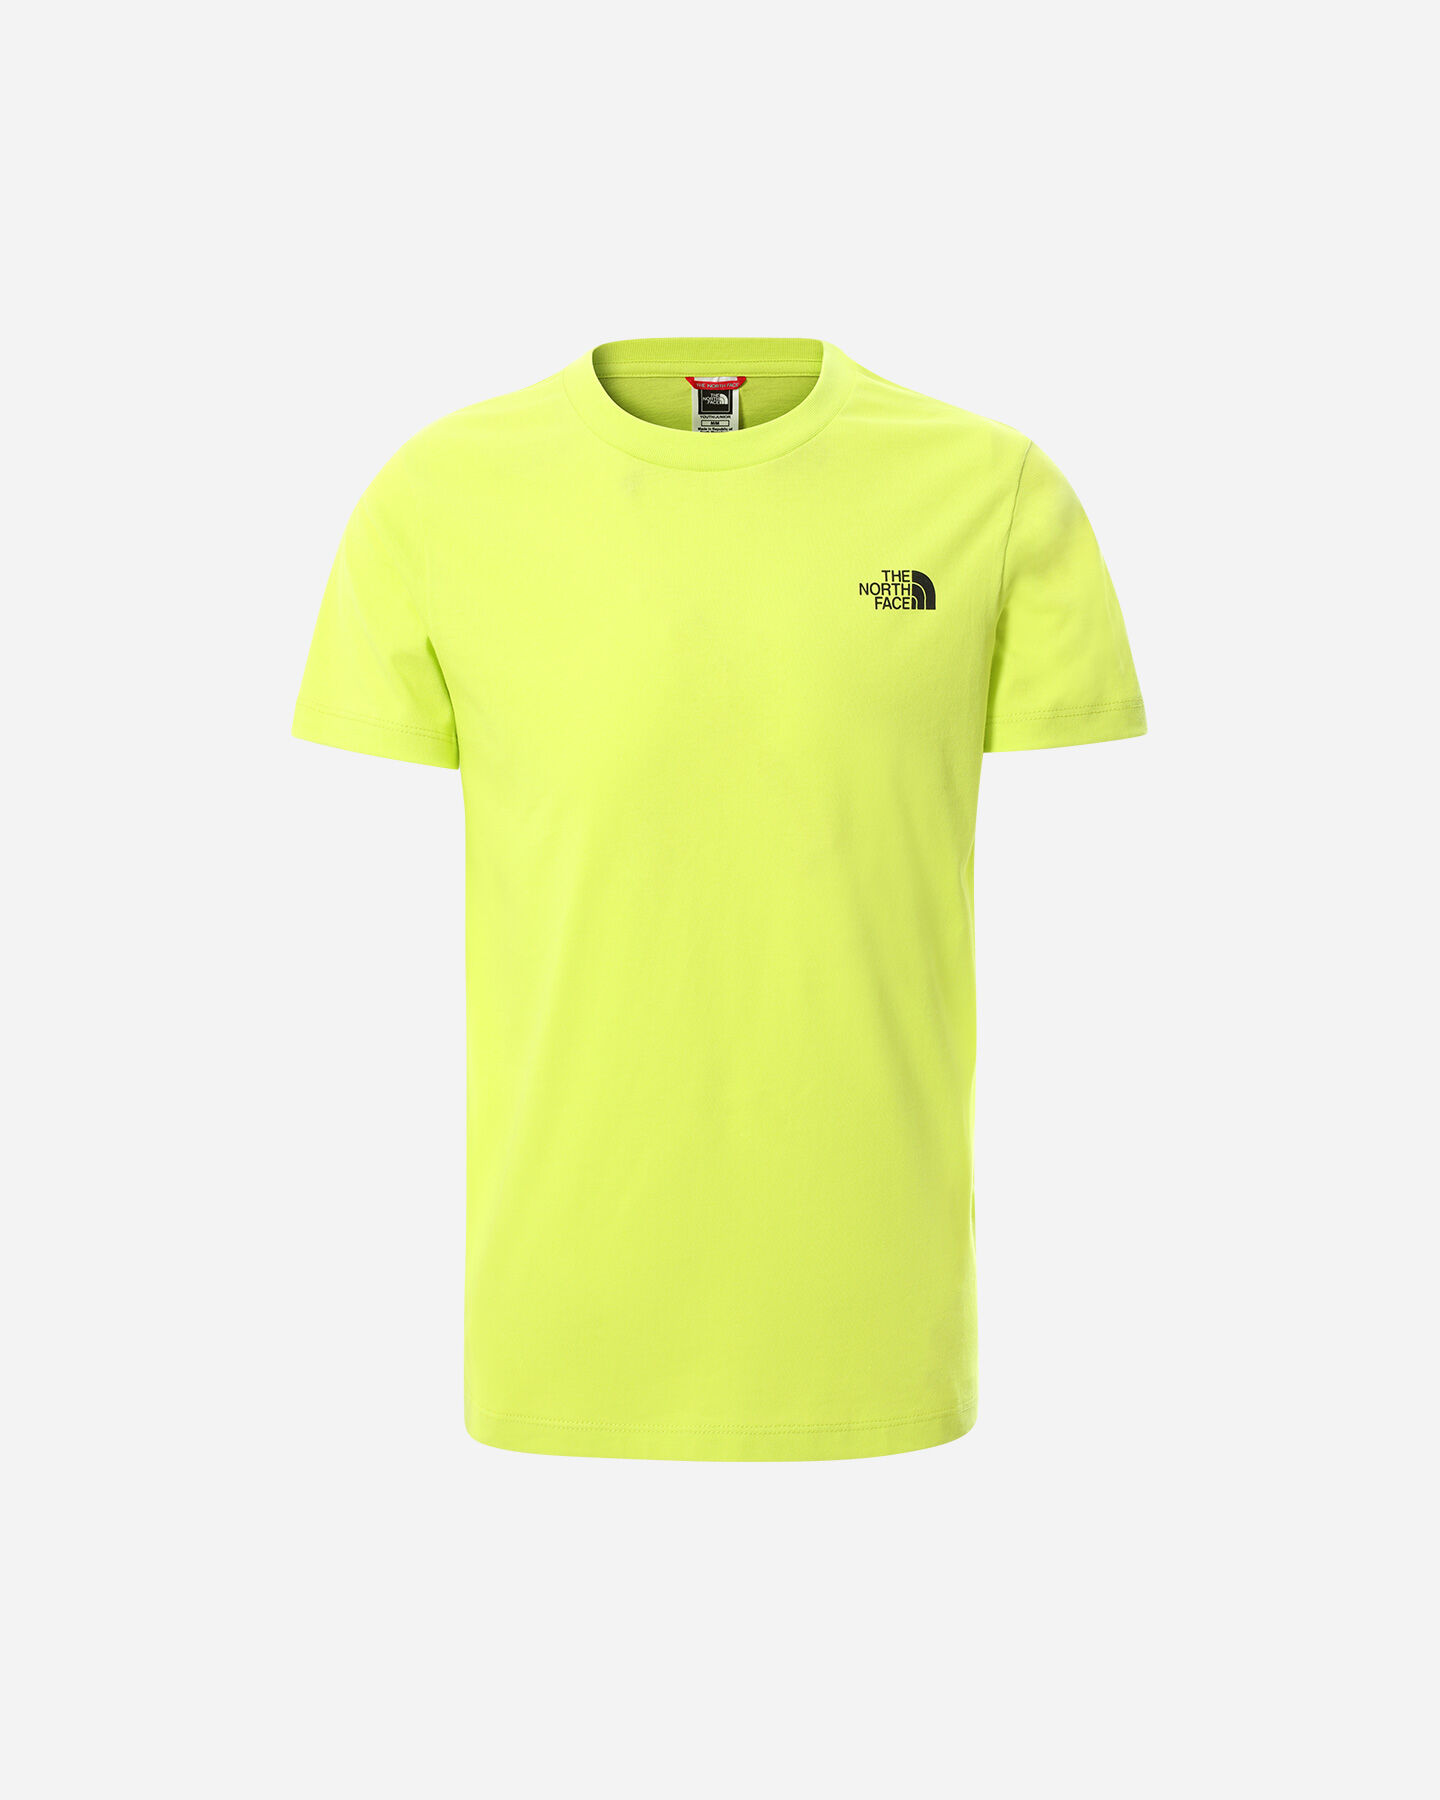  T-Shirt THE NORTH FACE SIMPLE DOME  JR S5314154|JE3|S scatto 0